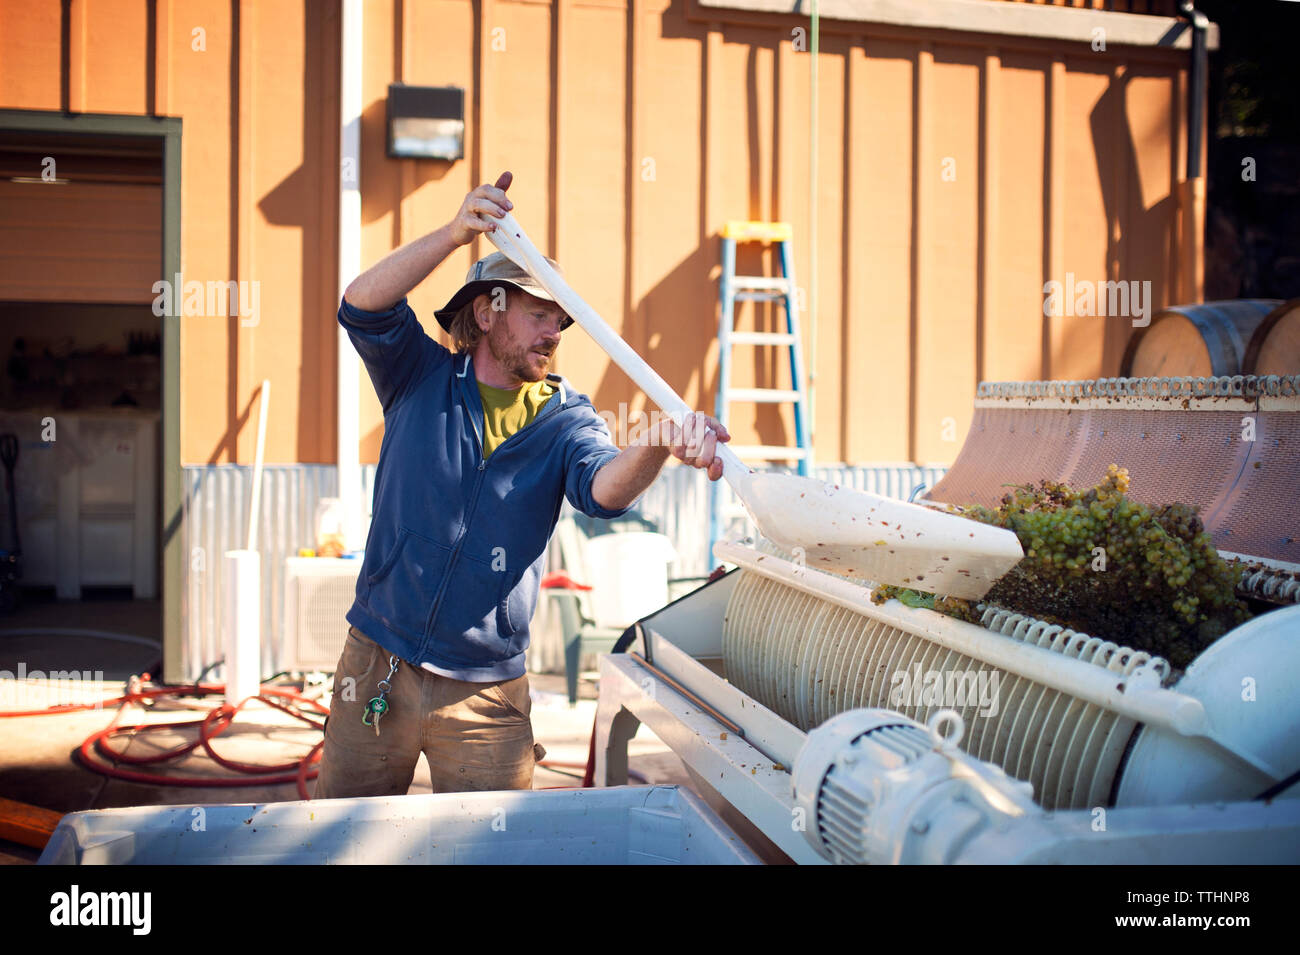 Male farmer putting grapes in machinery Stock Photo